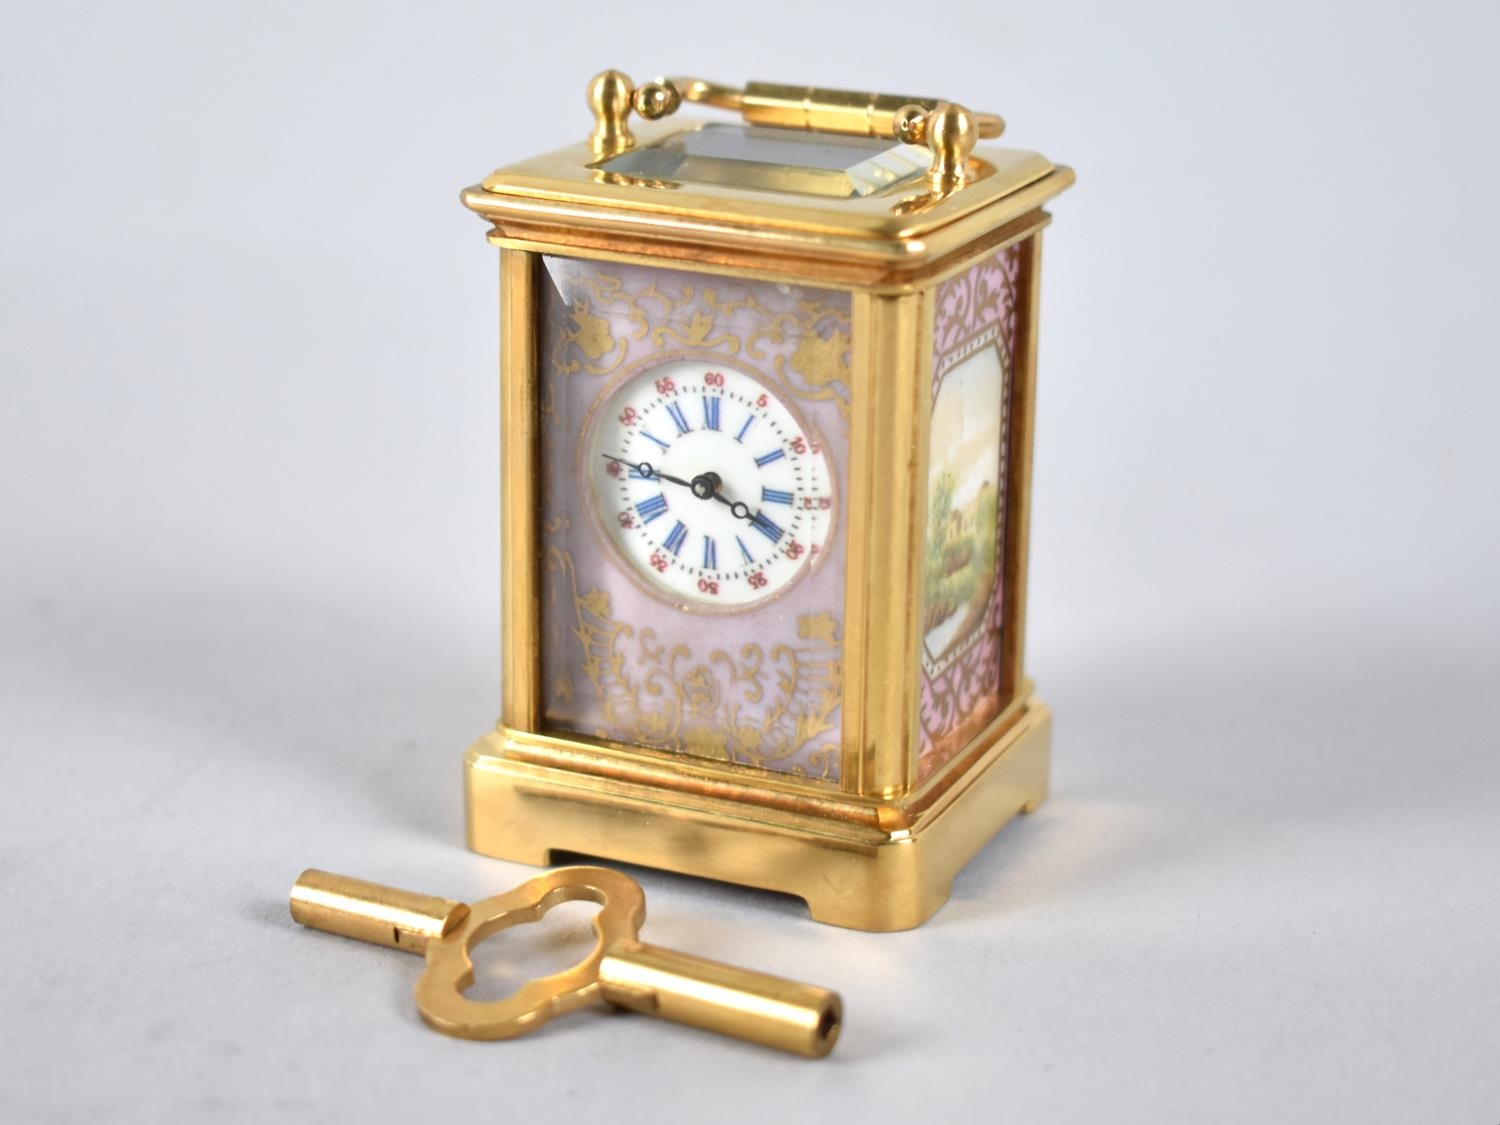 A Miniature Reproduction Sevres Style Carriage Clock with Gilt Brass Case and Pink and Gilt